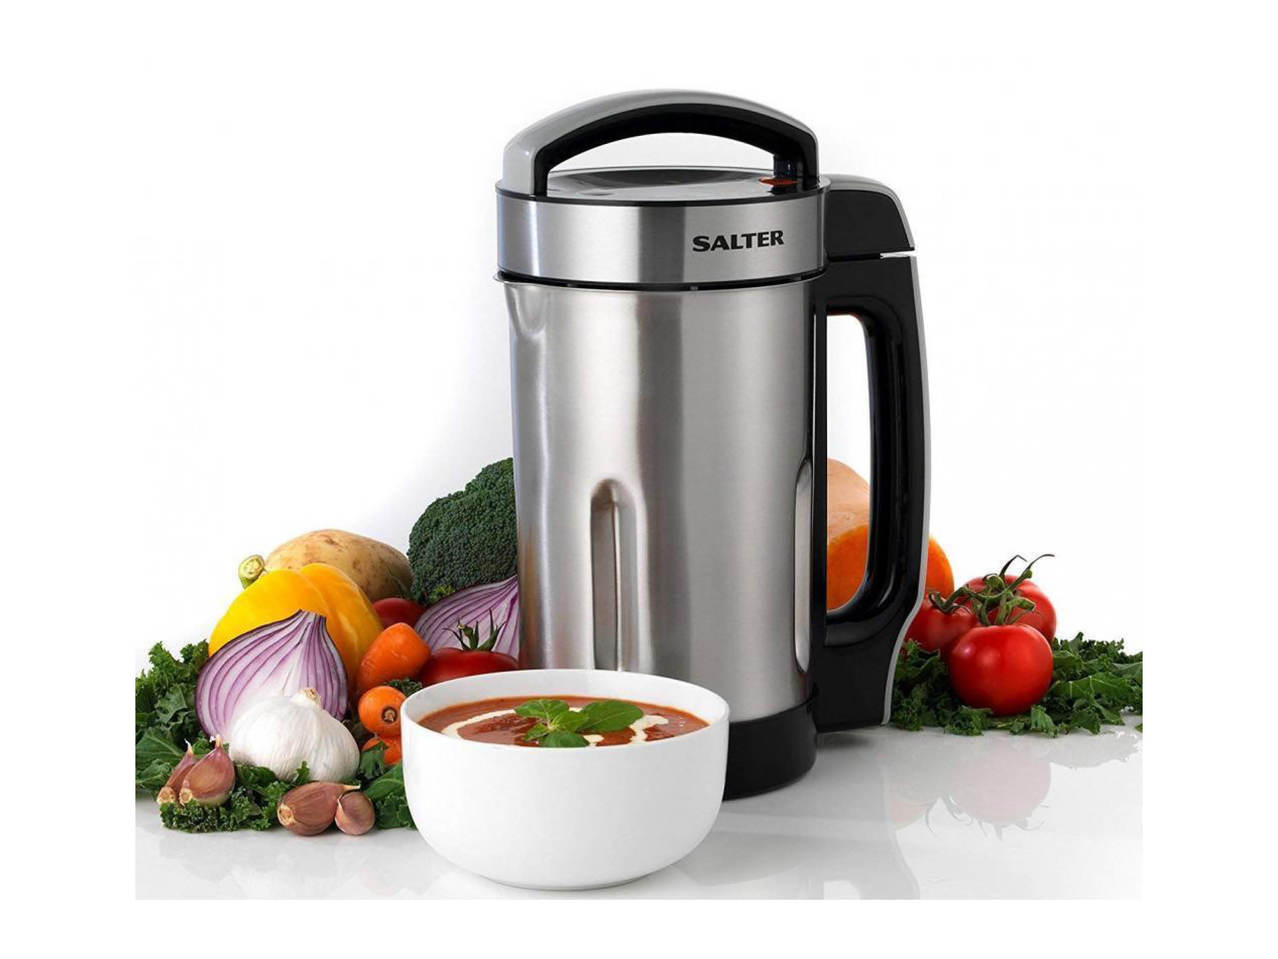 SALTER 1050W Go Healthy Electric Soup Maker